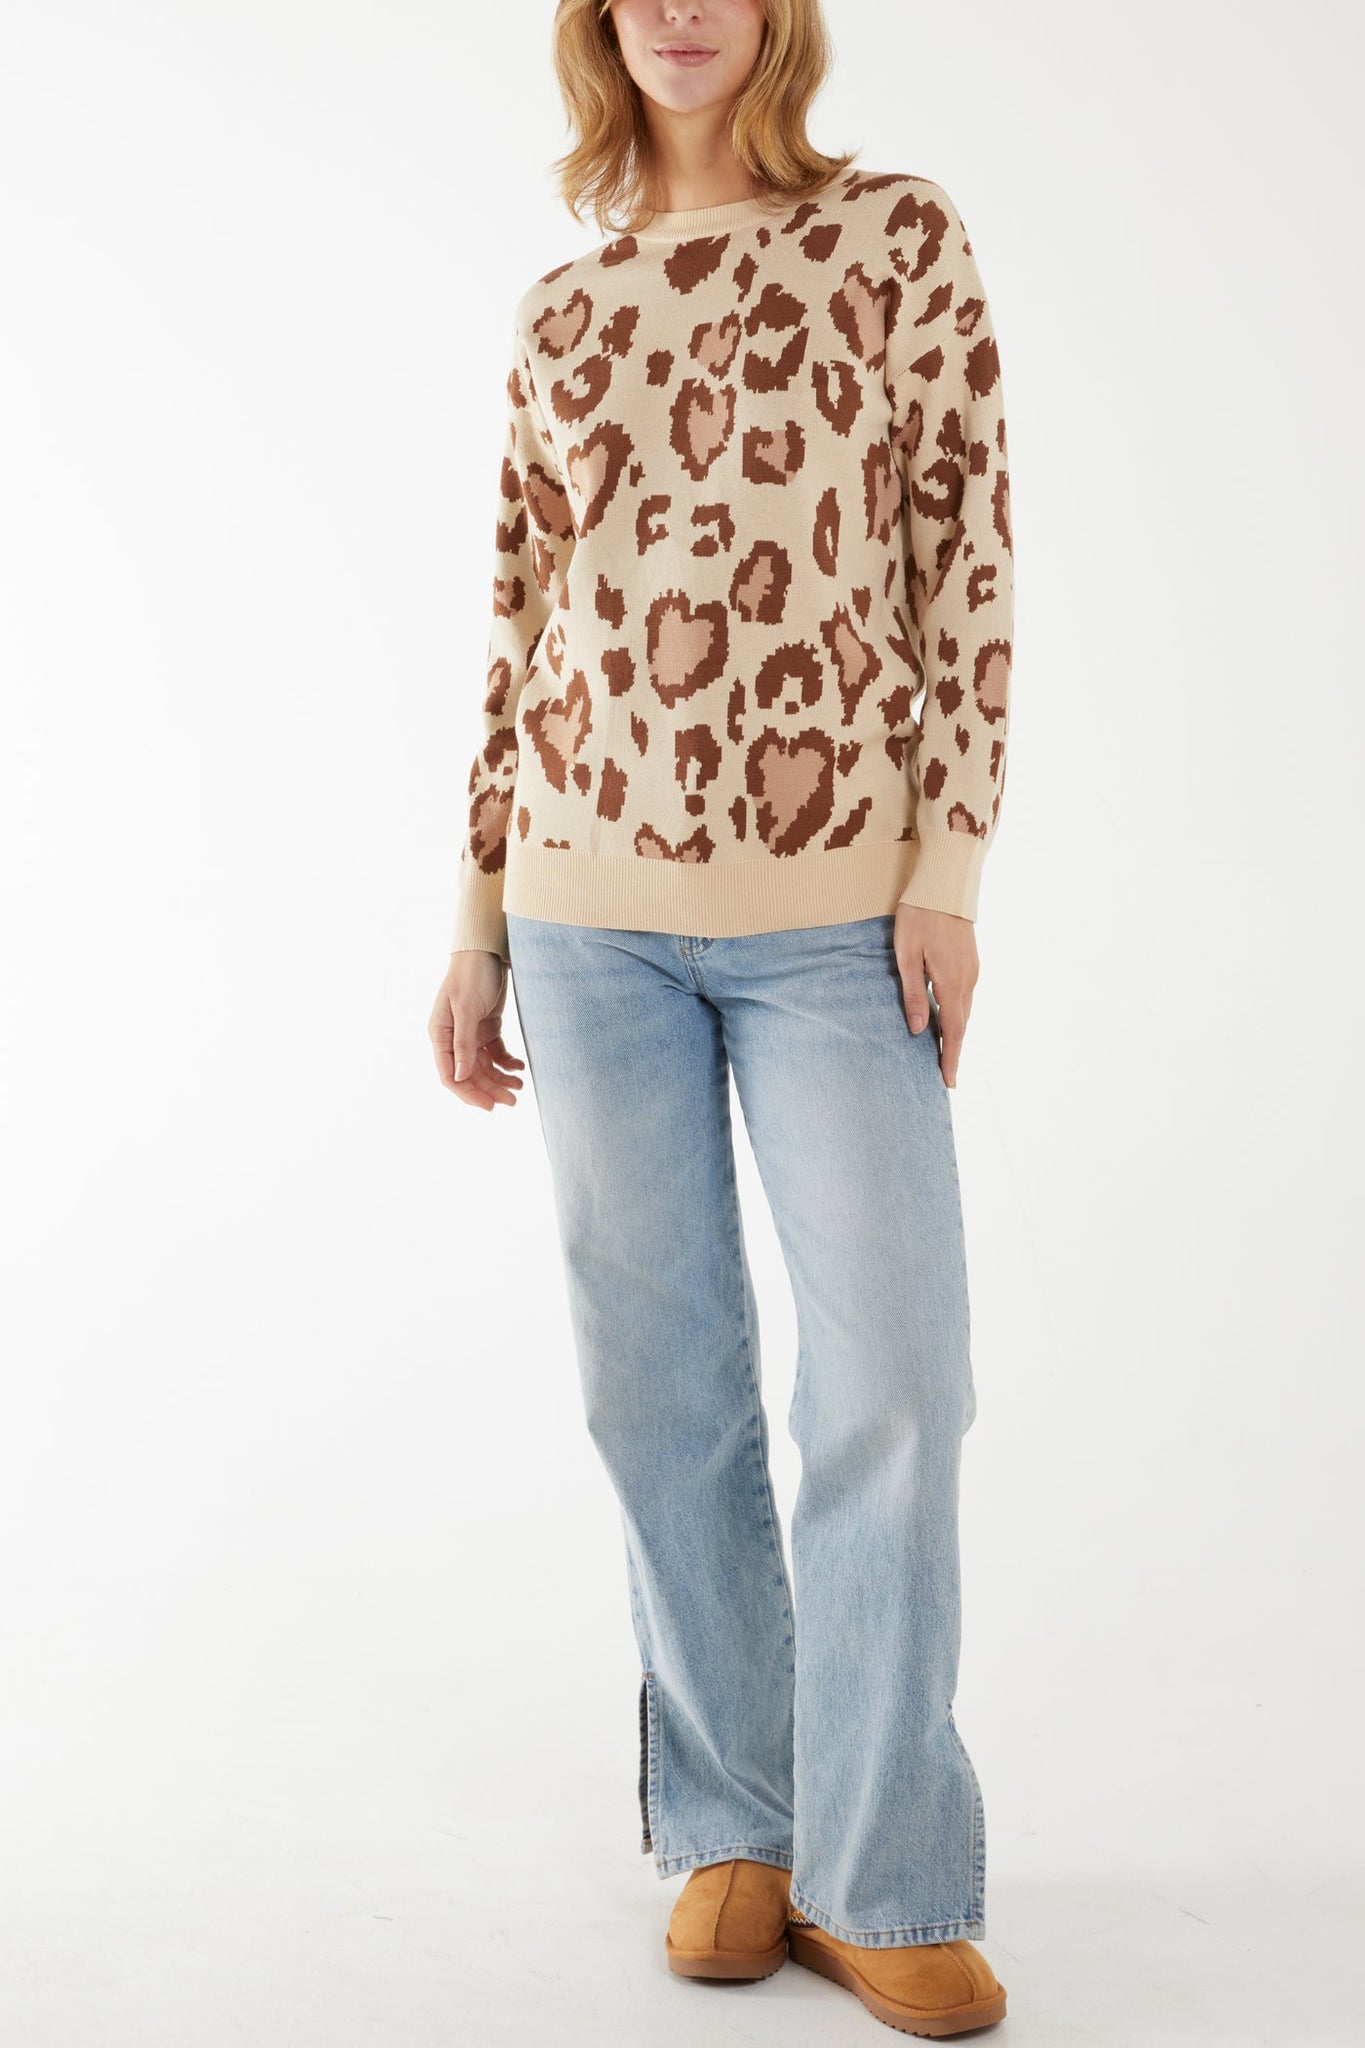 Abstract brown heart animal print jumper